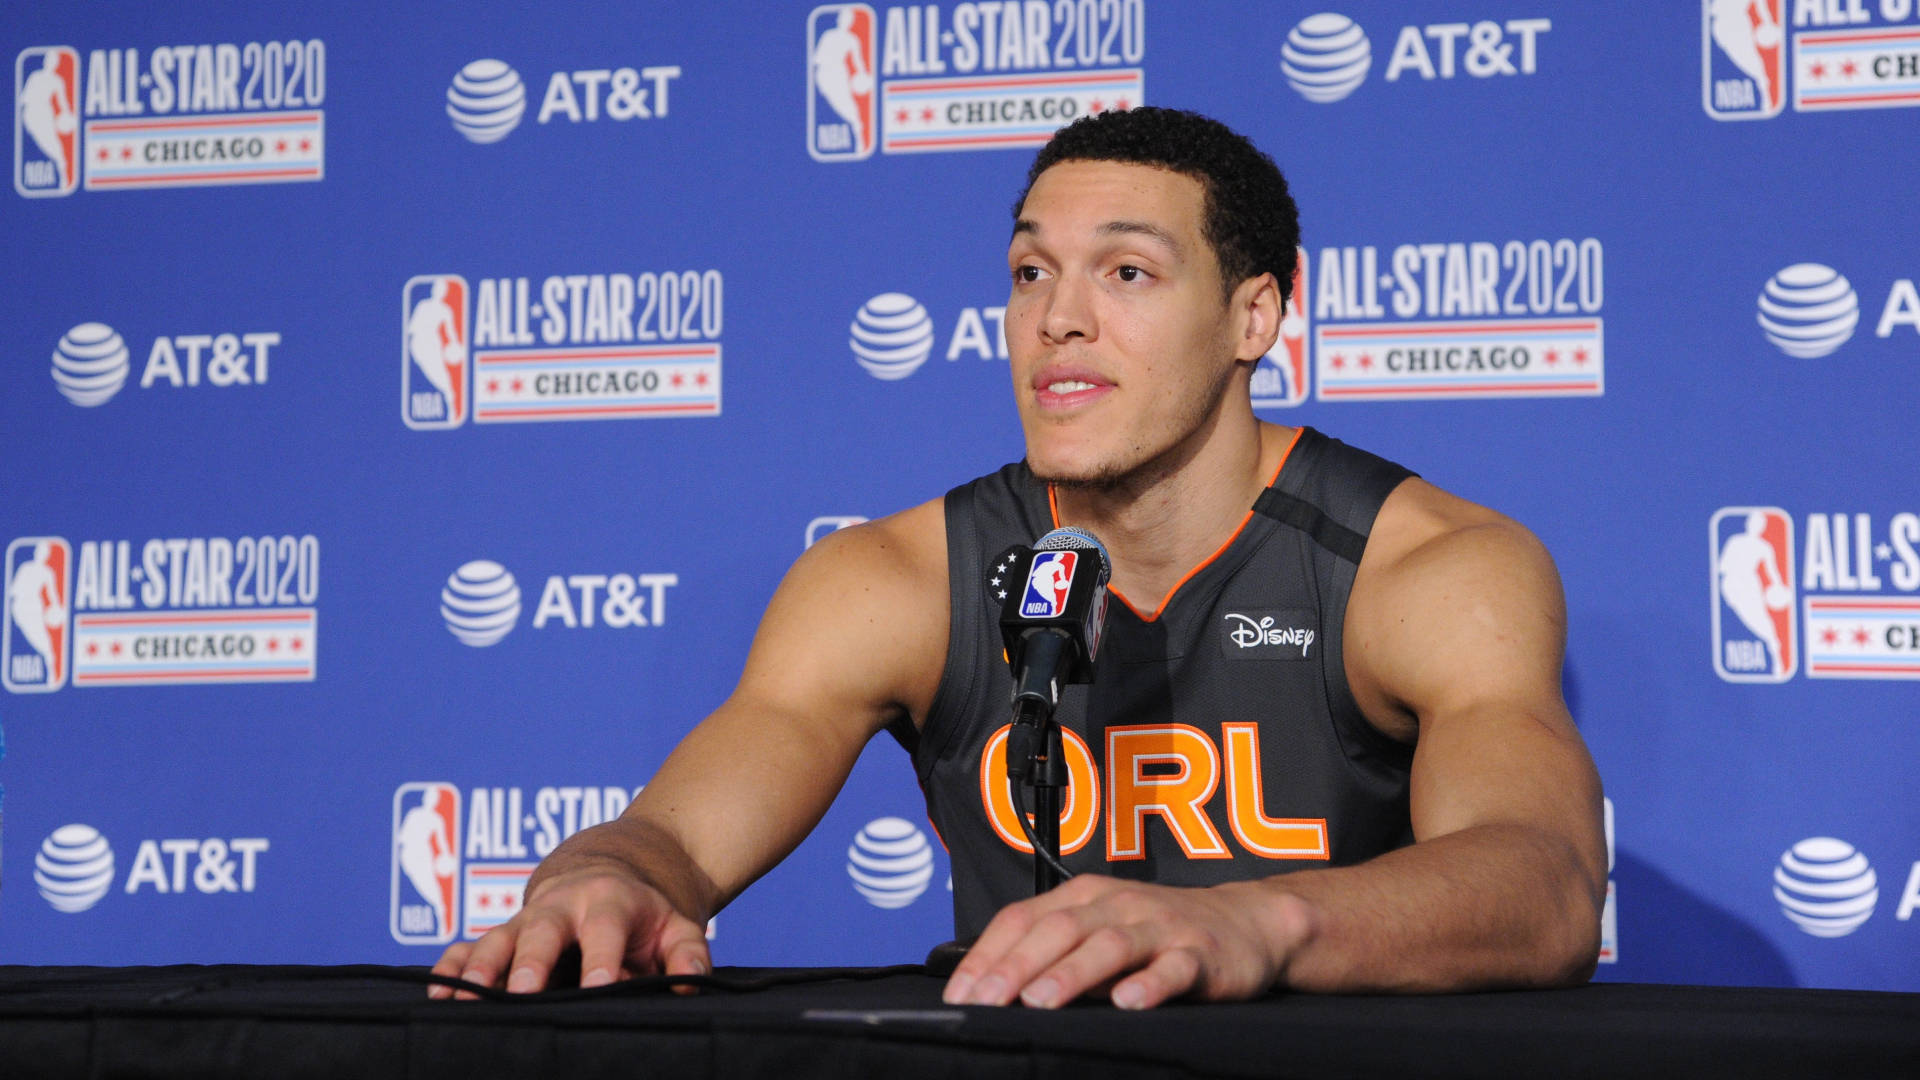 Nba All-star Aaron Gordon In Action Background